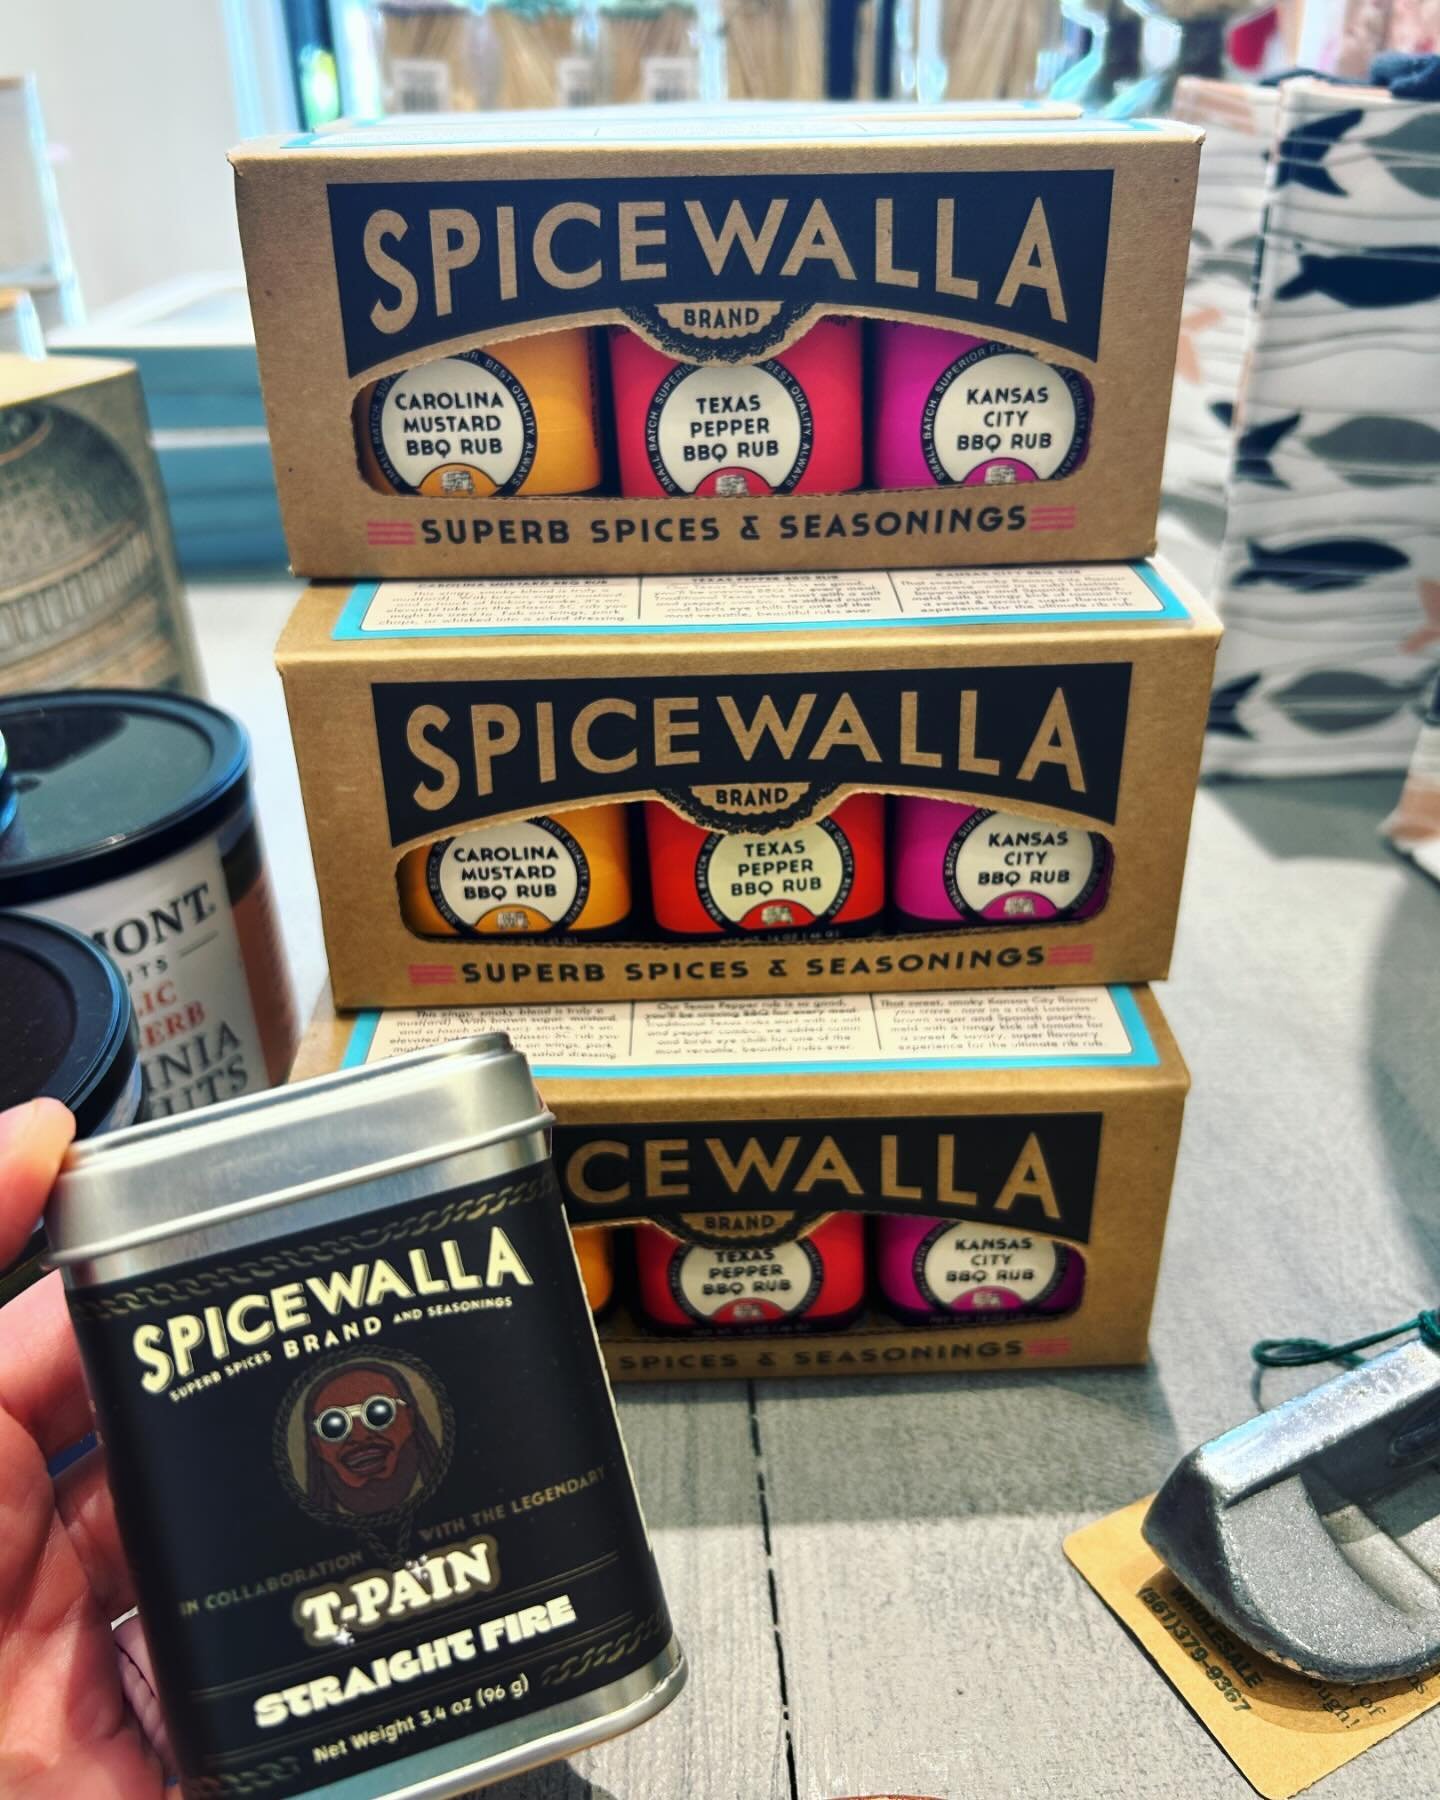 These @spicewalla grilling spices make a great Father&rsquo;s Day gift! We love the collaboration with @tpain. #straightfire is a #musttry. 

Stop by today. Open til 6 @thecrossingclarendon. 

#shopsmall #shoplocal #shoparl #boutiqueshopping #clarend